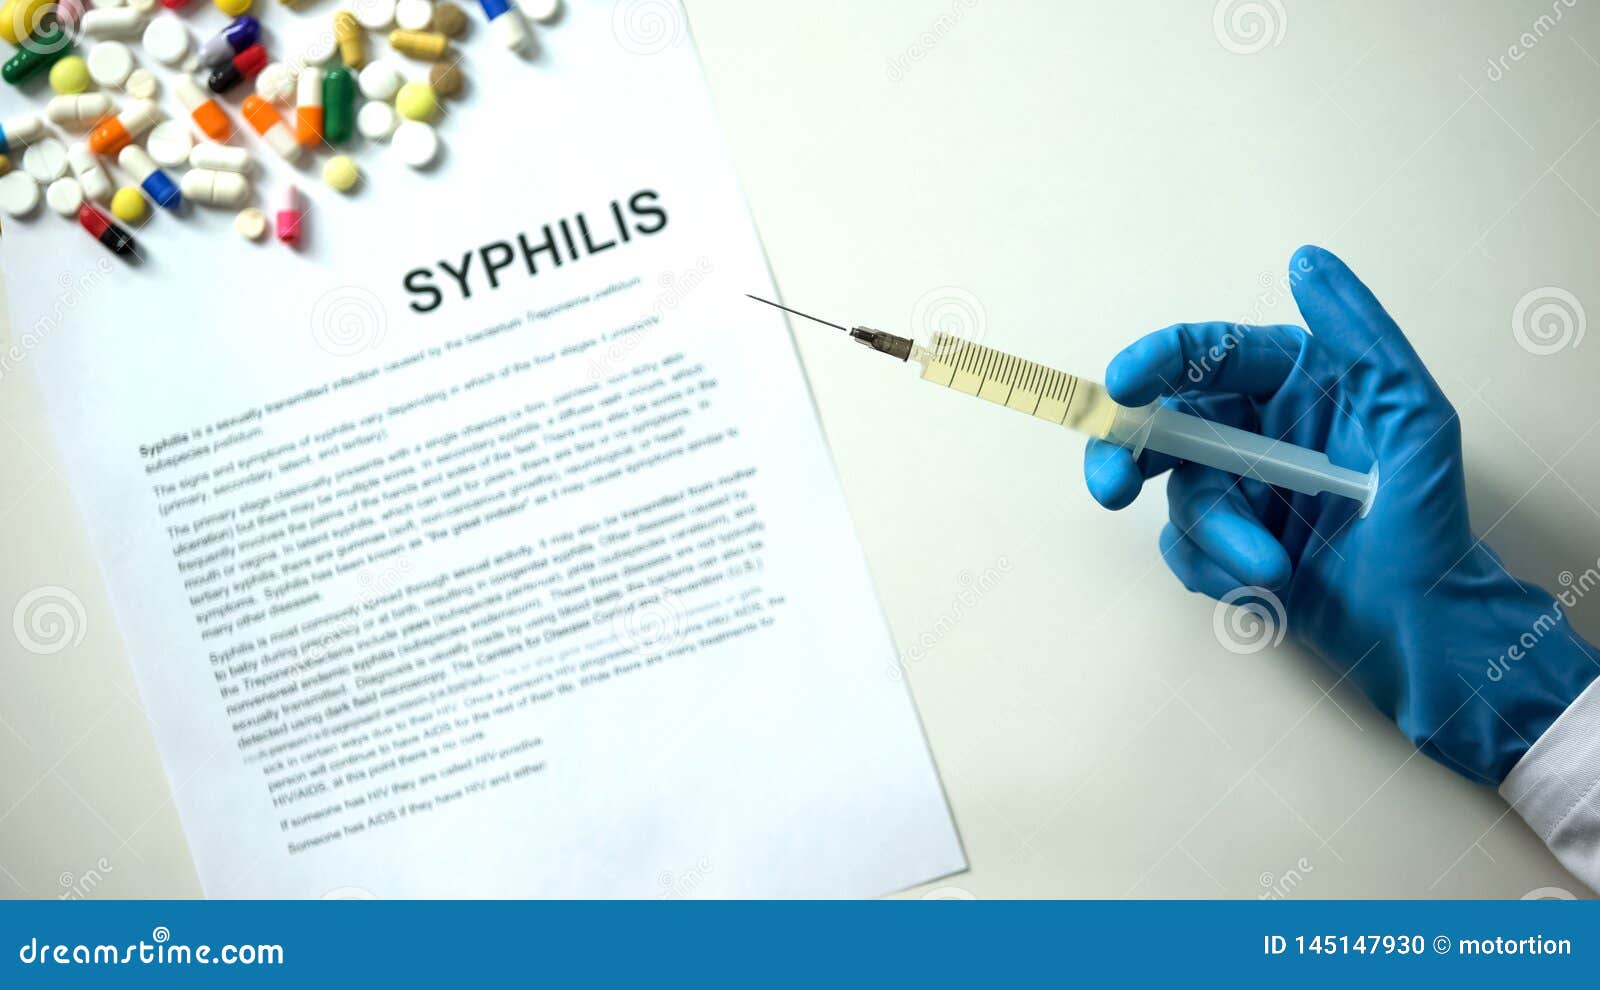 research paper about syphilis